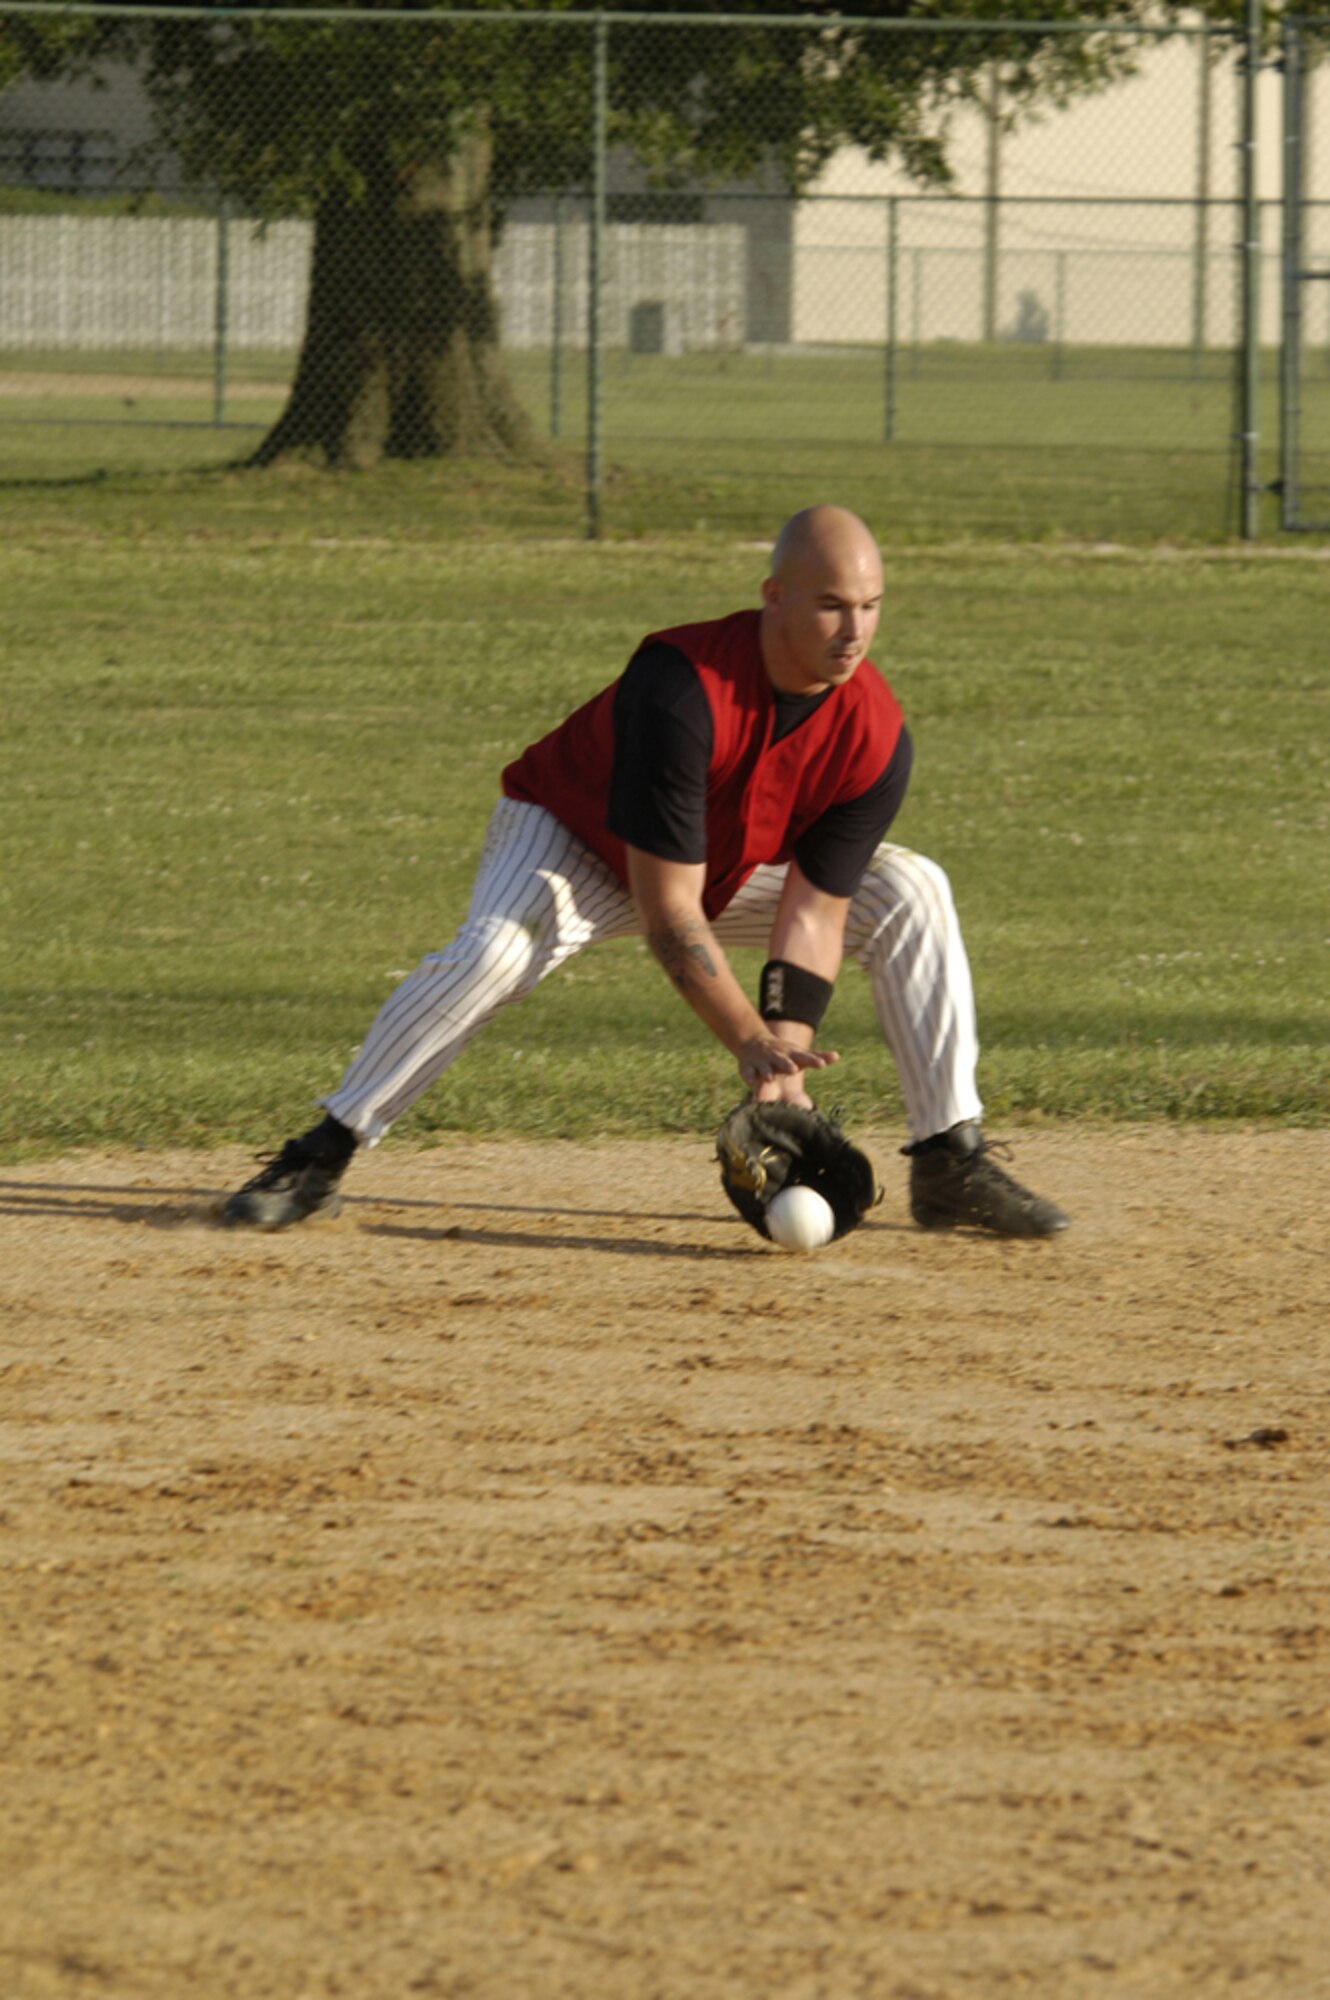 Preston Bolen, 436th APS short stop, scoops a grounder and launches it to first base for the out during Monday’s intramural softball game versus the 436th LRS. (U.S. Air Force photo/Senior Airman James Bolinger)